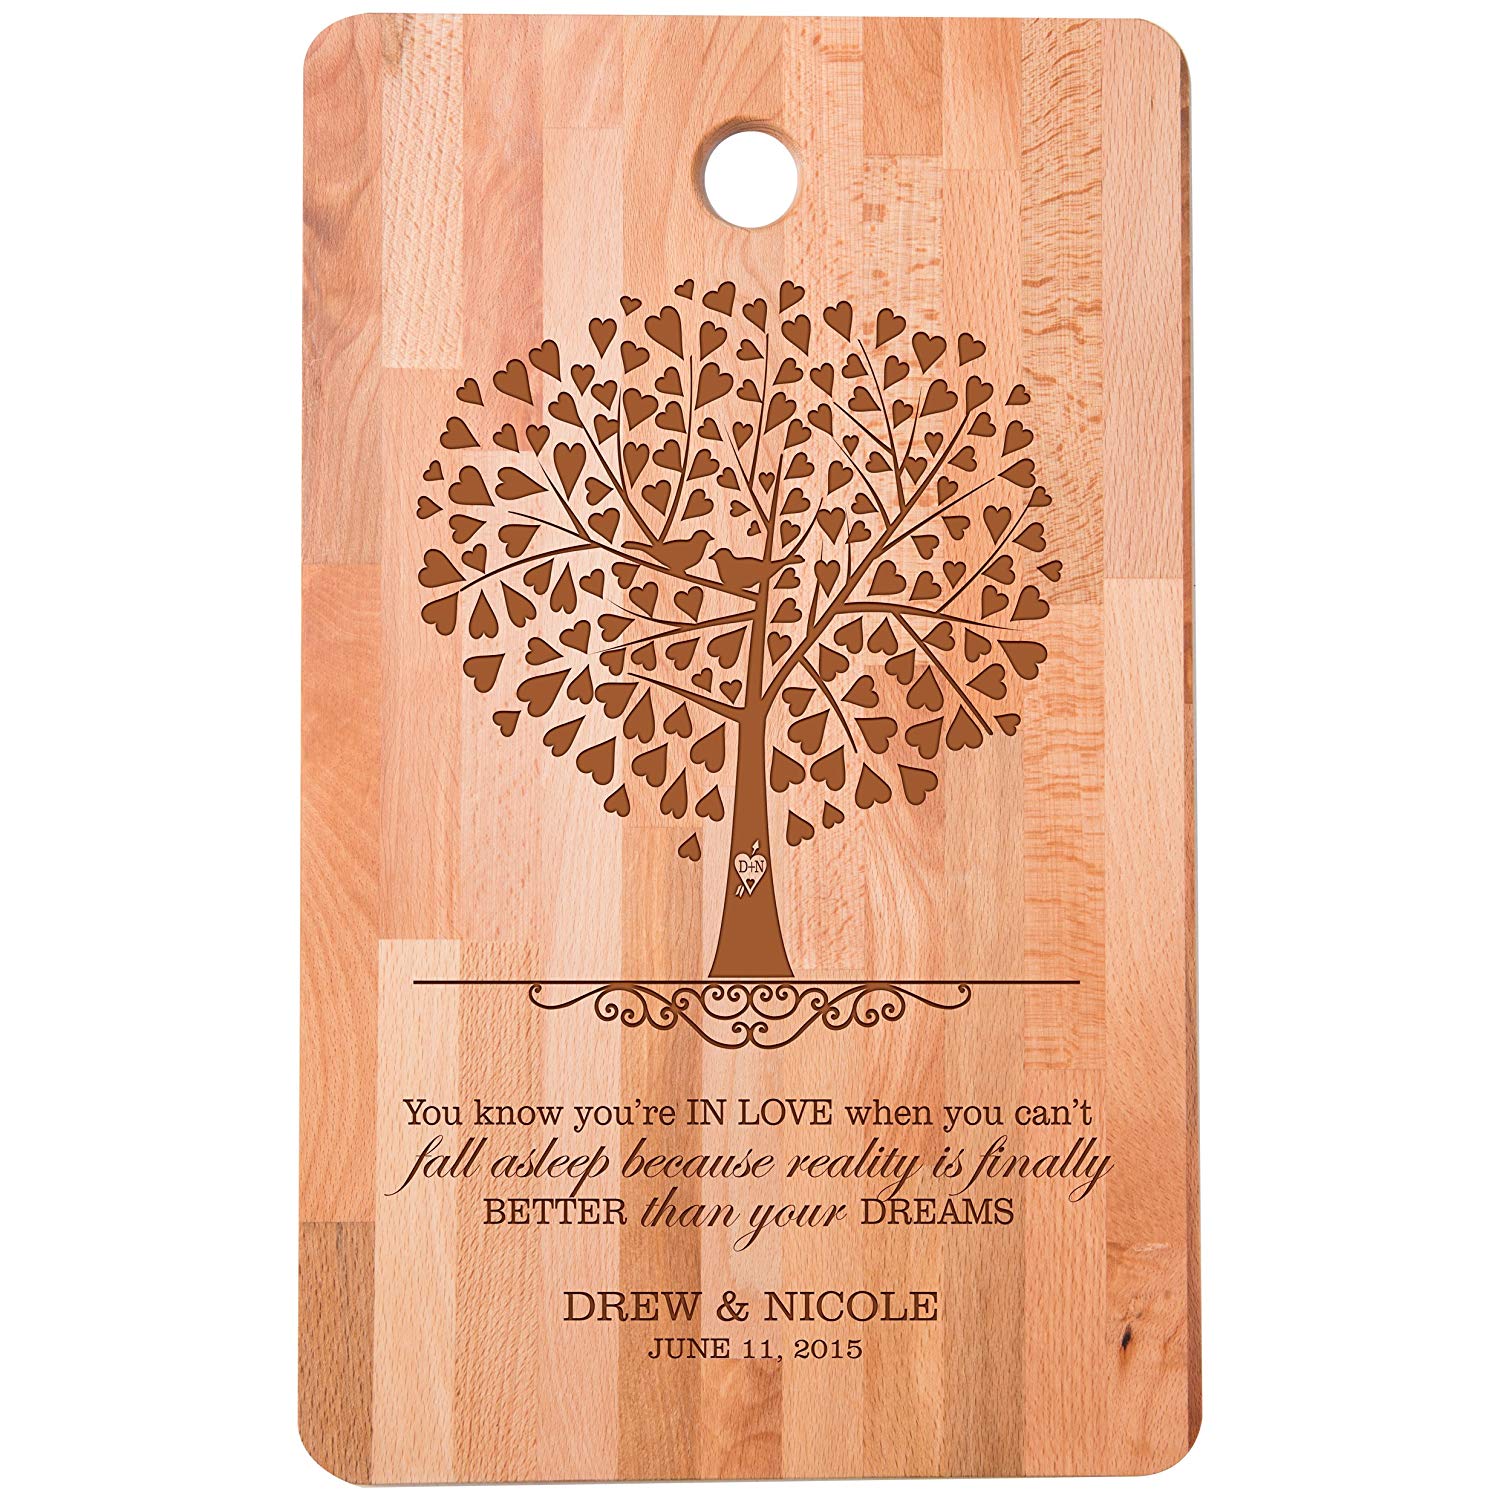 Personalized bamboo Wedding Cutting Board Gift - You Know You're In Love - LifeSong Milestones